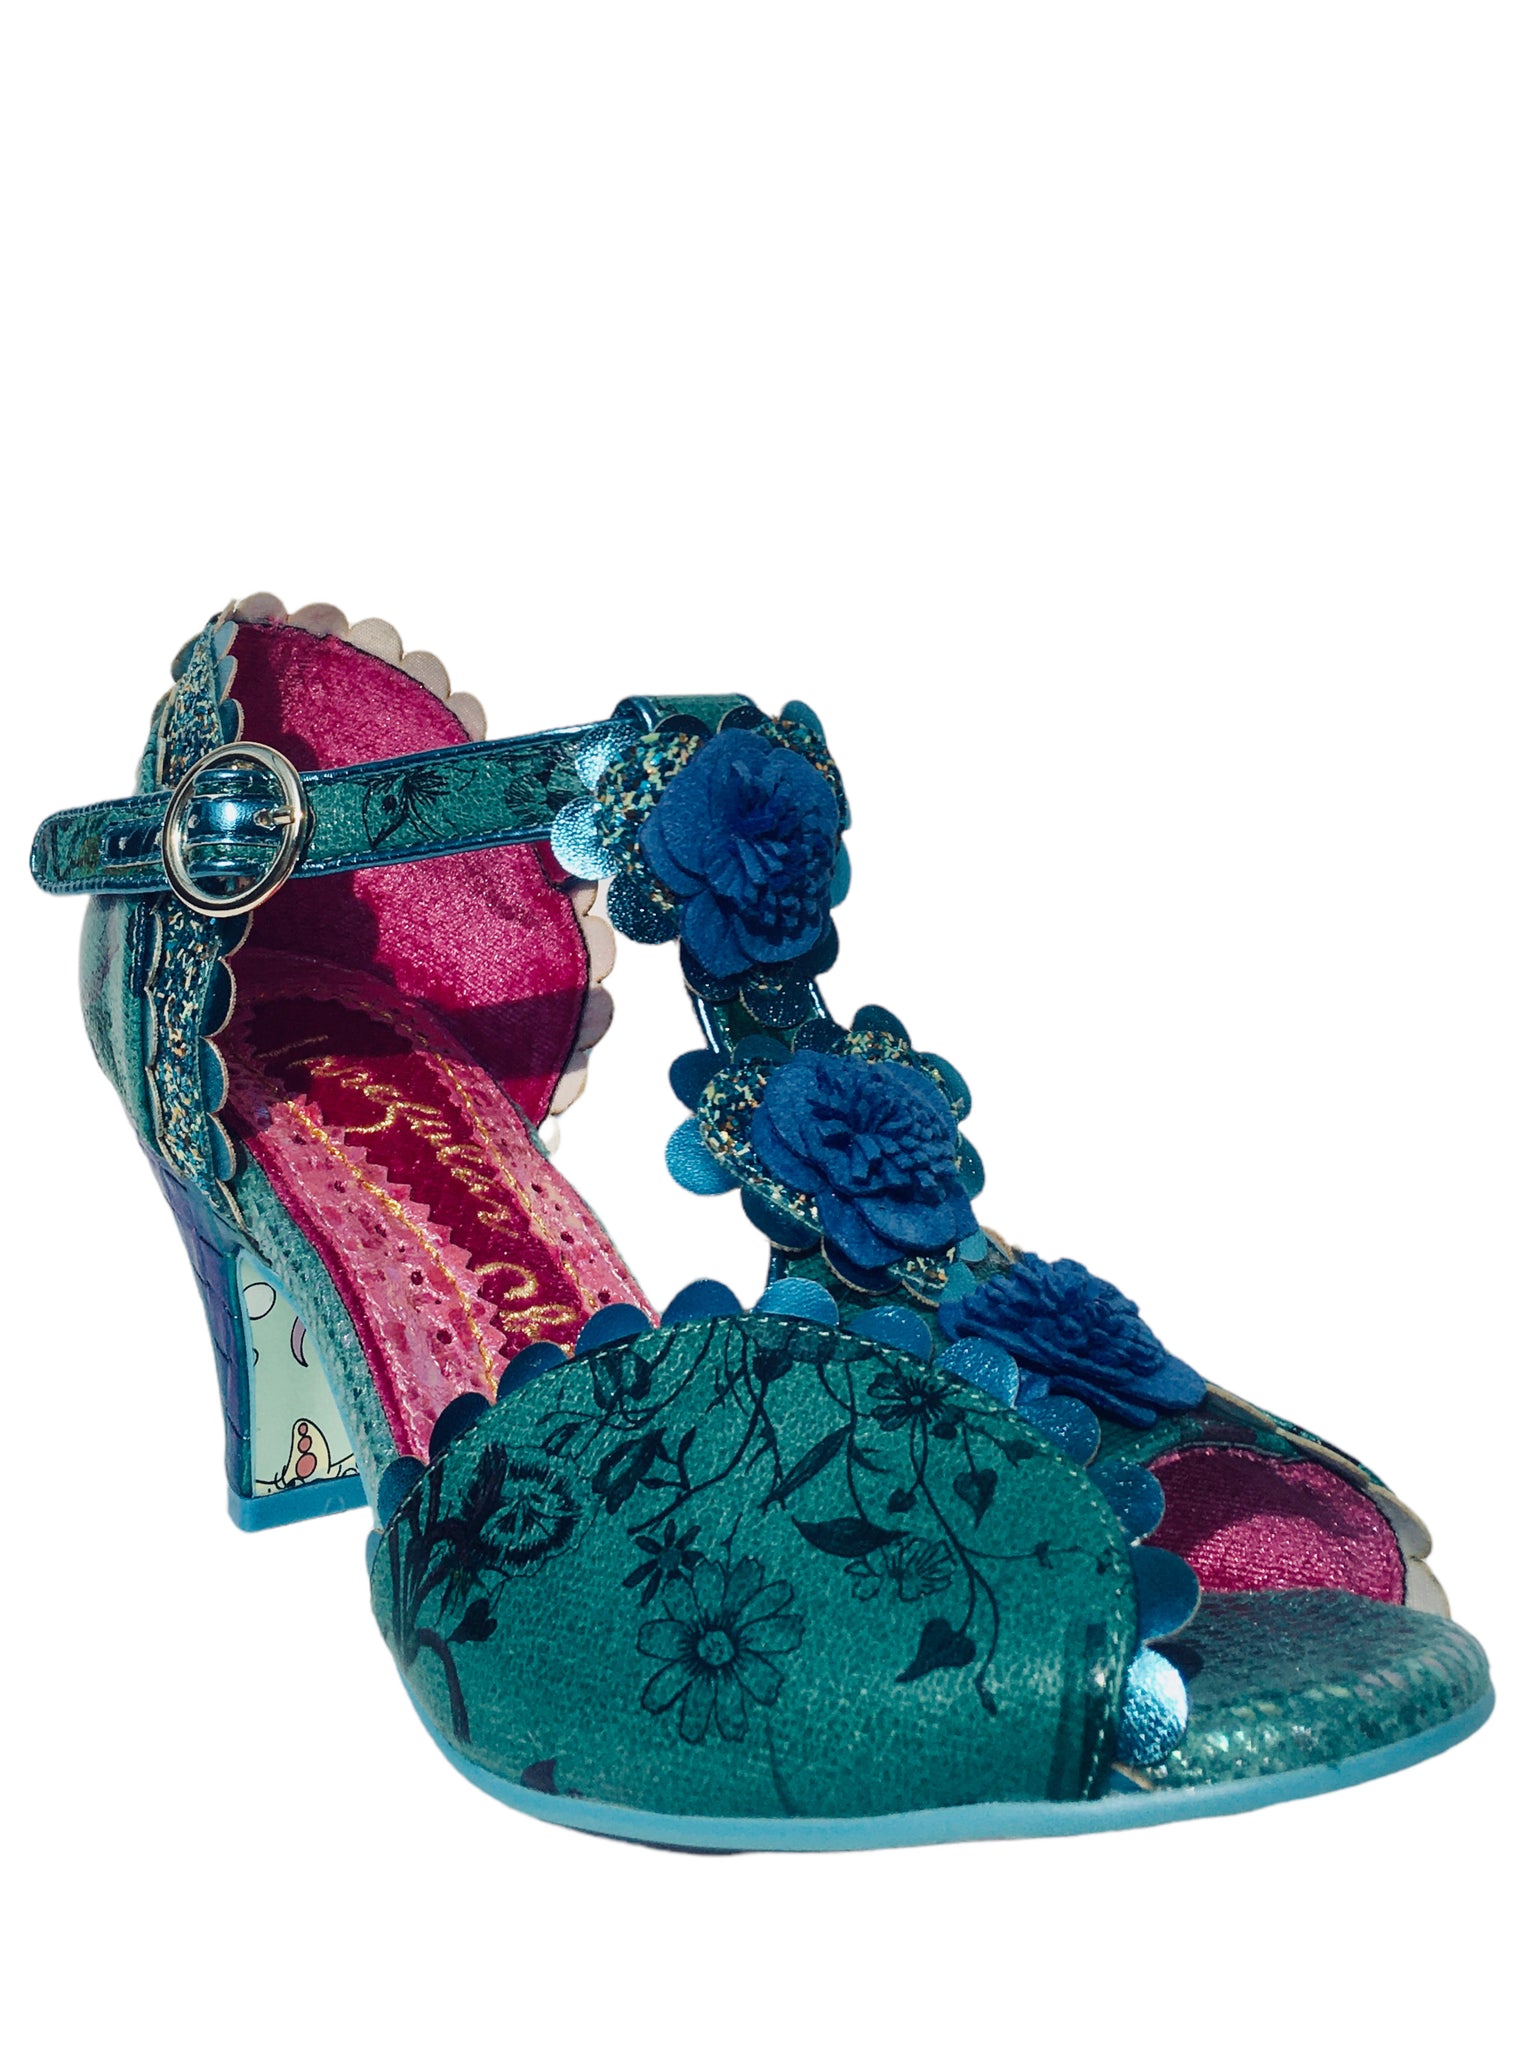 IRREGULAR CHOICE Shoes - Fast delivery